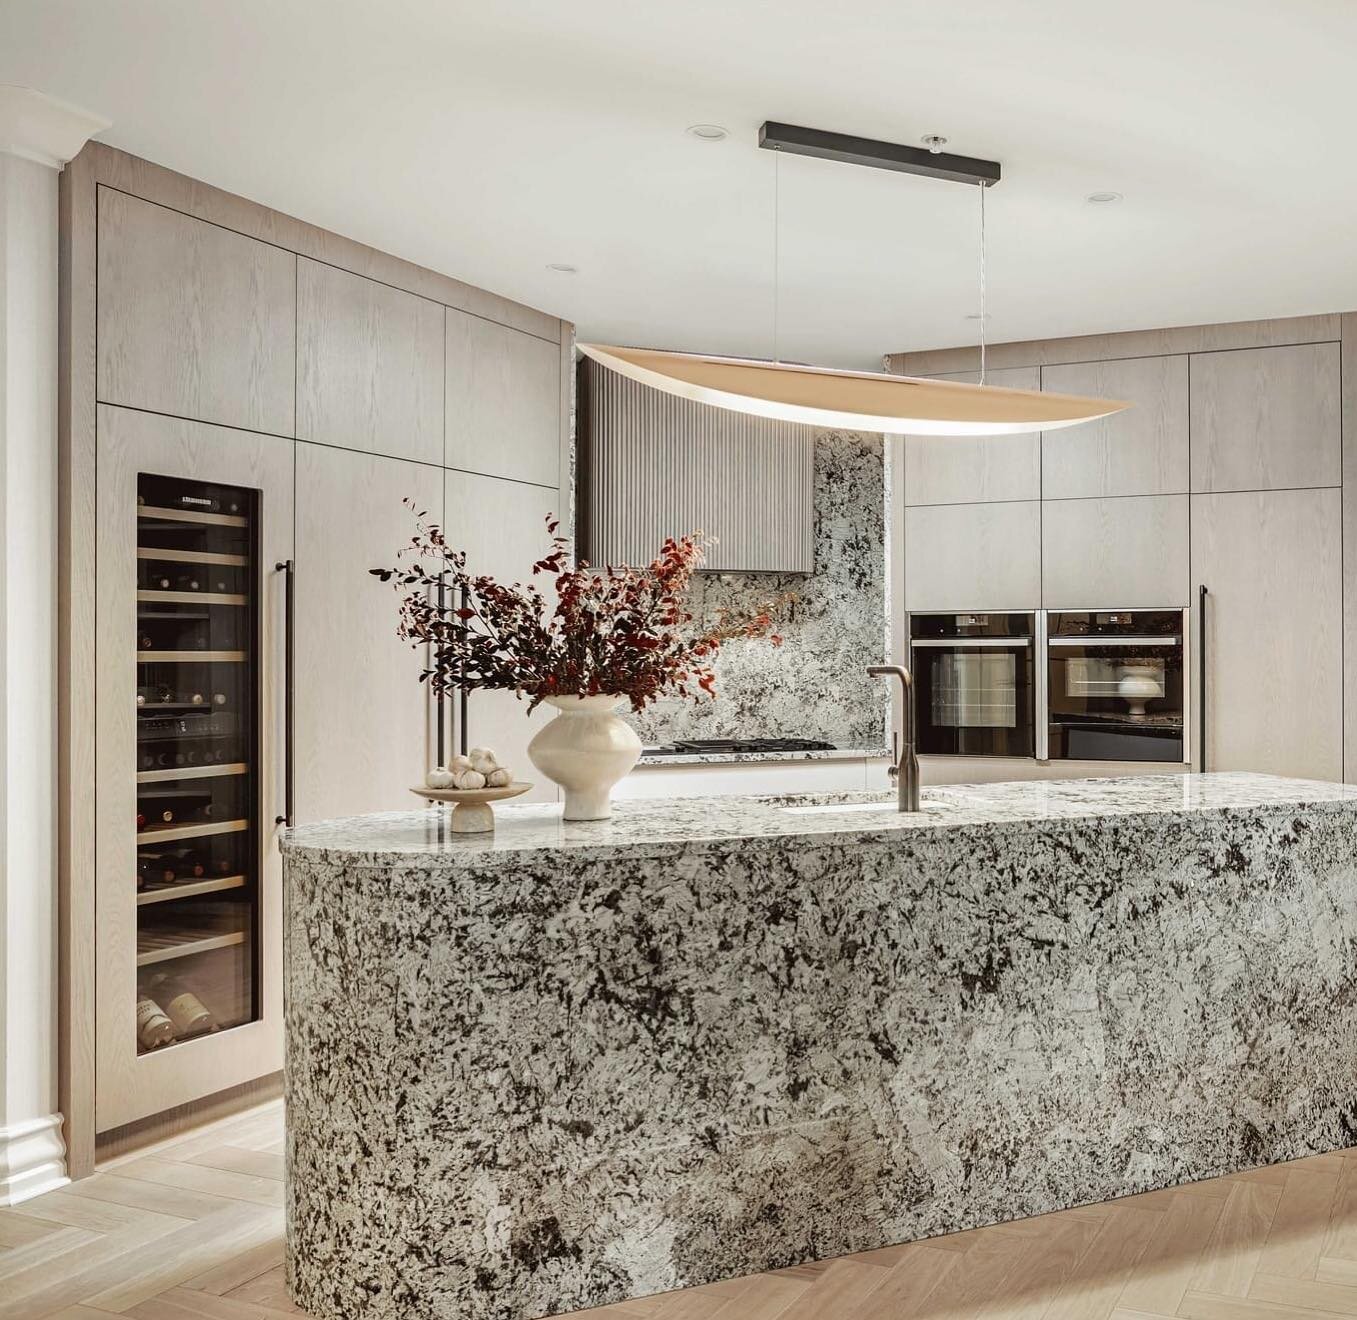 WINNER &ndash;TIDA TRENDS NEW ZEALAND DESIGNER KITCHEN 2023  I  SUEDE + STONE
 
 
Winner &ndash; 2023 TIDA New Zealand Designer Kitchen | Trends (trendsideas.com)
Wow, thank you Paul, it&rsquo;s an incredible honor to receive this award and I&rsquo;m